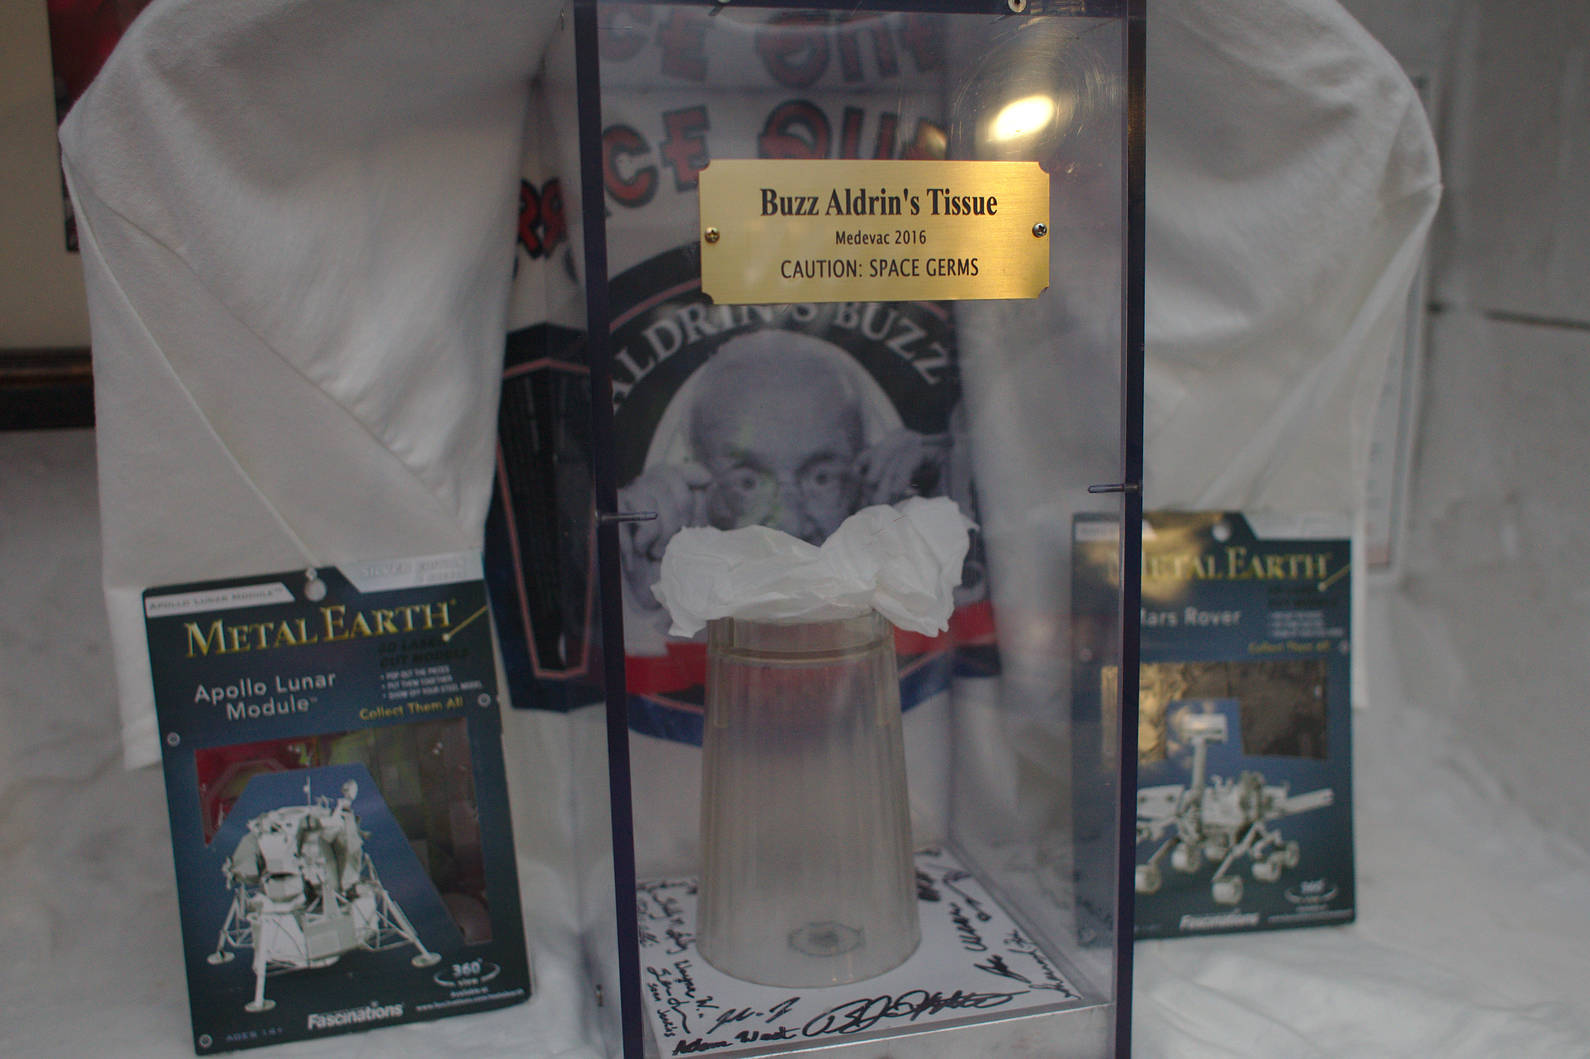 Some of the 2016/2017 summer crew set up a shrine commemorating the visit of Buzz Aldrin to south pole station, humorously displaying a tissue and a cup used by the former astronaut.